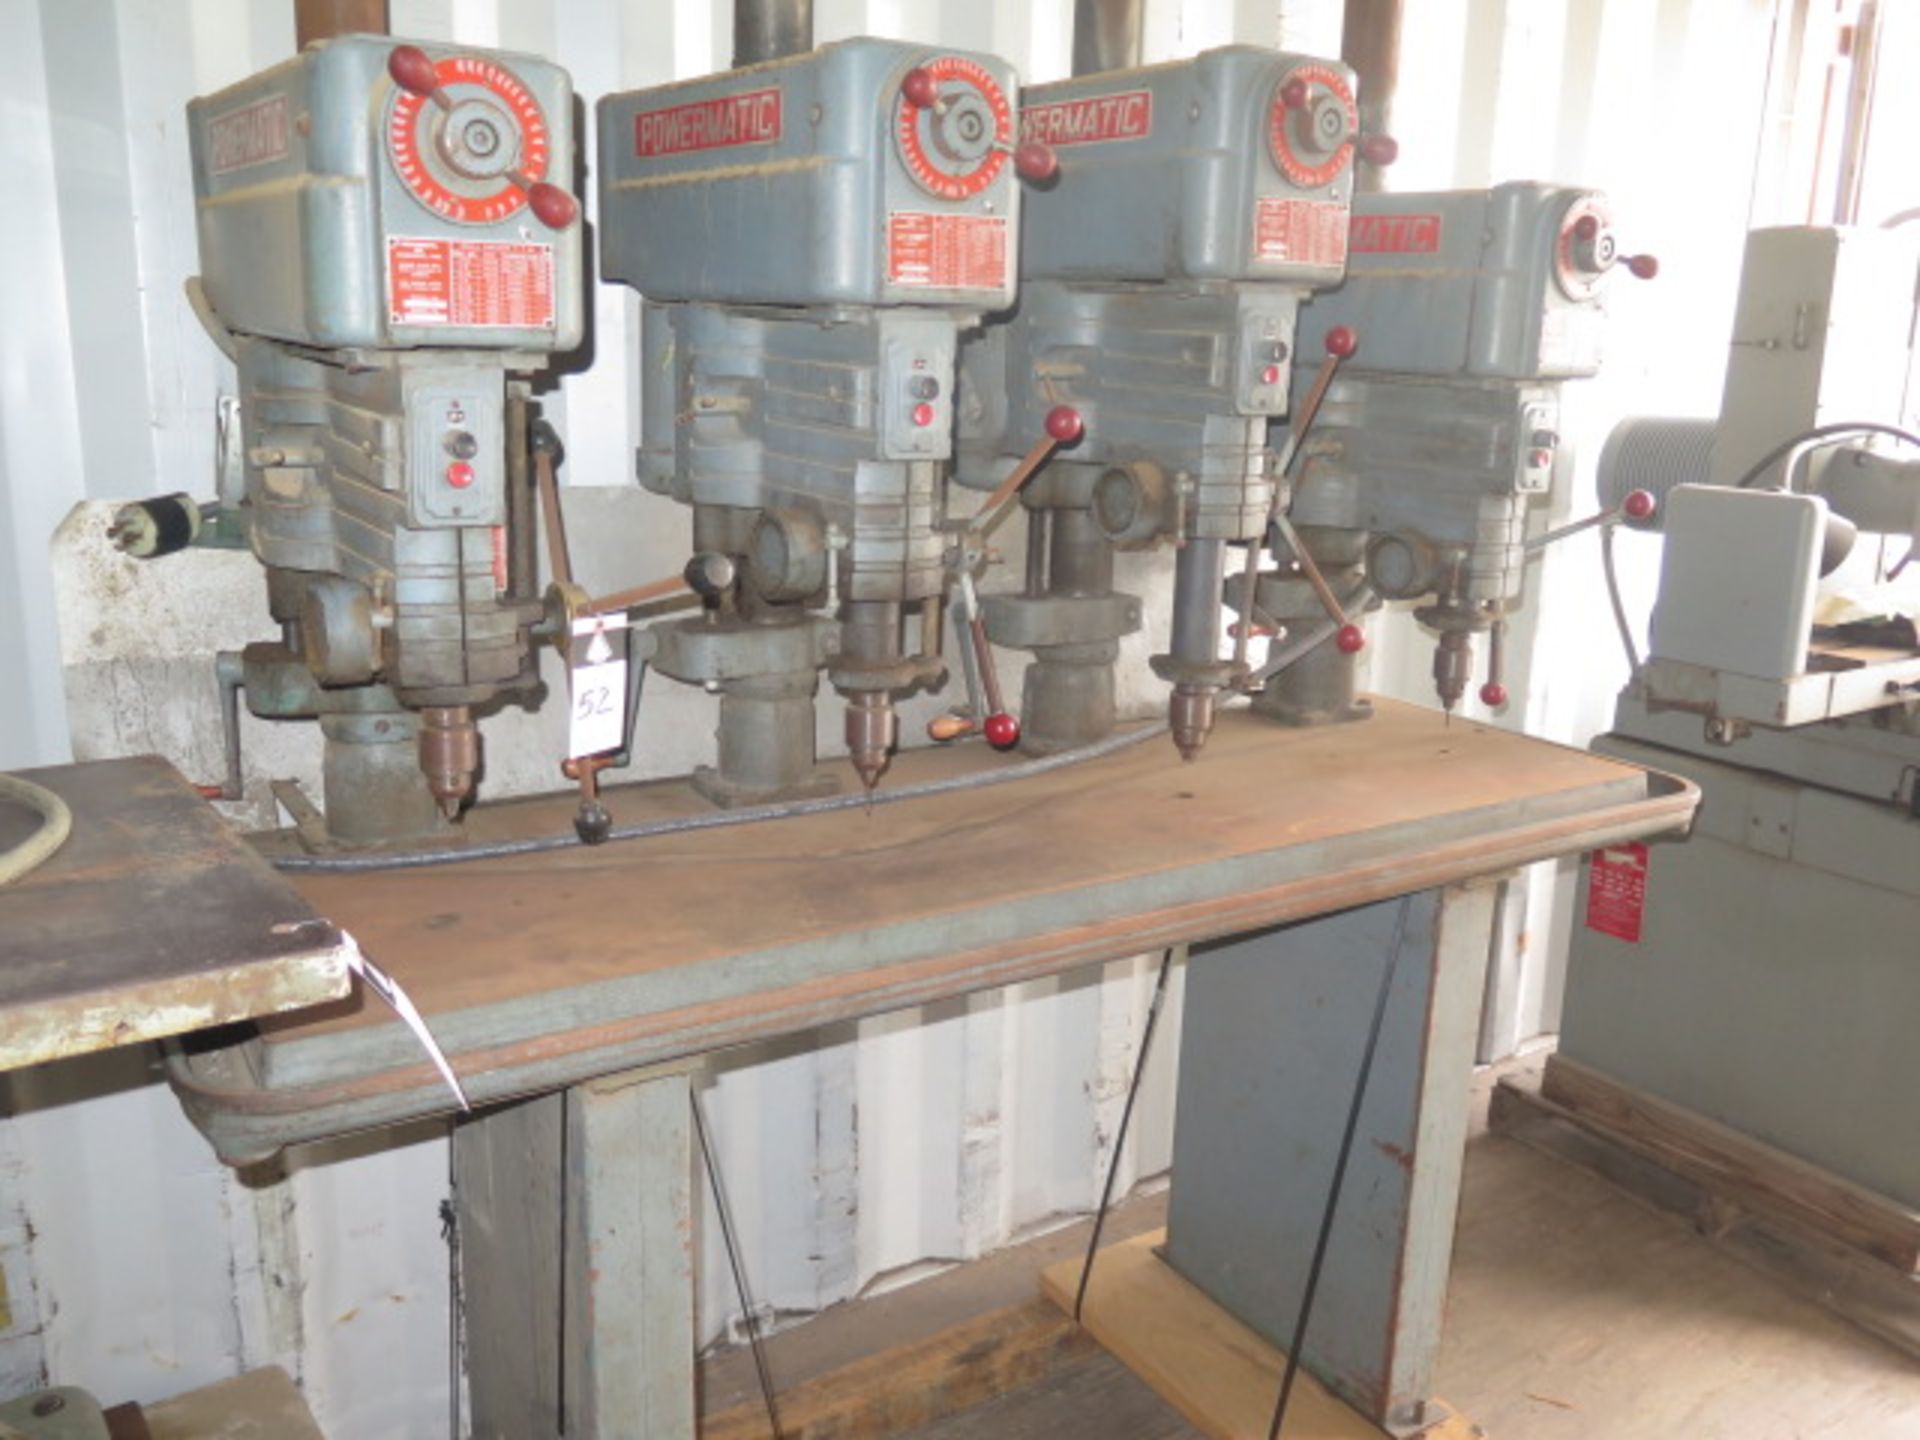 Powermatic 4-Head Gang Drill Press w/ mdl. 1150 Variable Speed Heads 19 ¾” x 65 ½” Table - Image 2 of 6